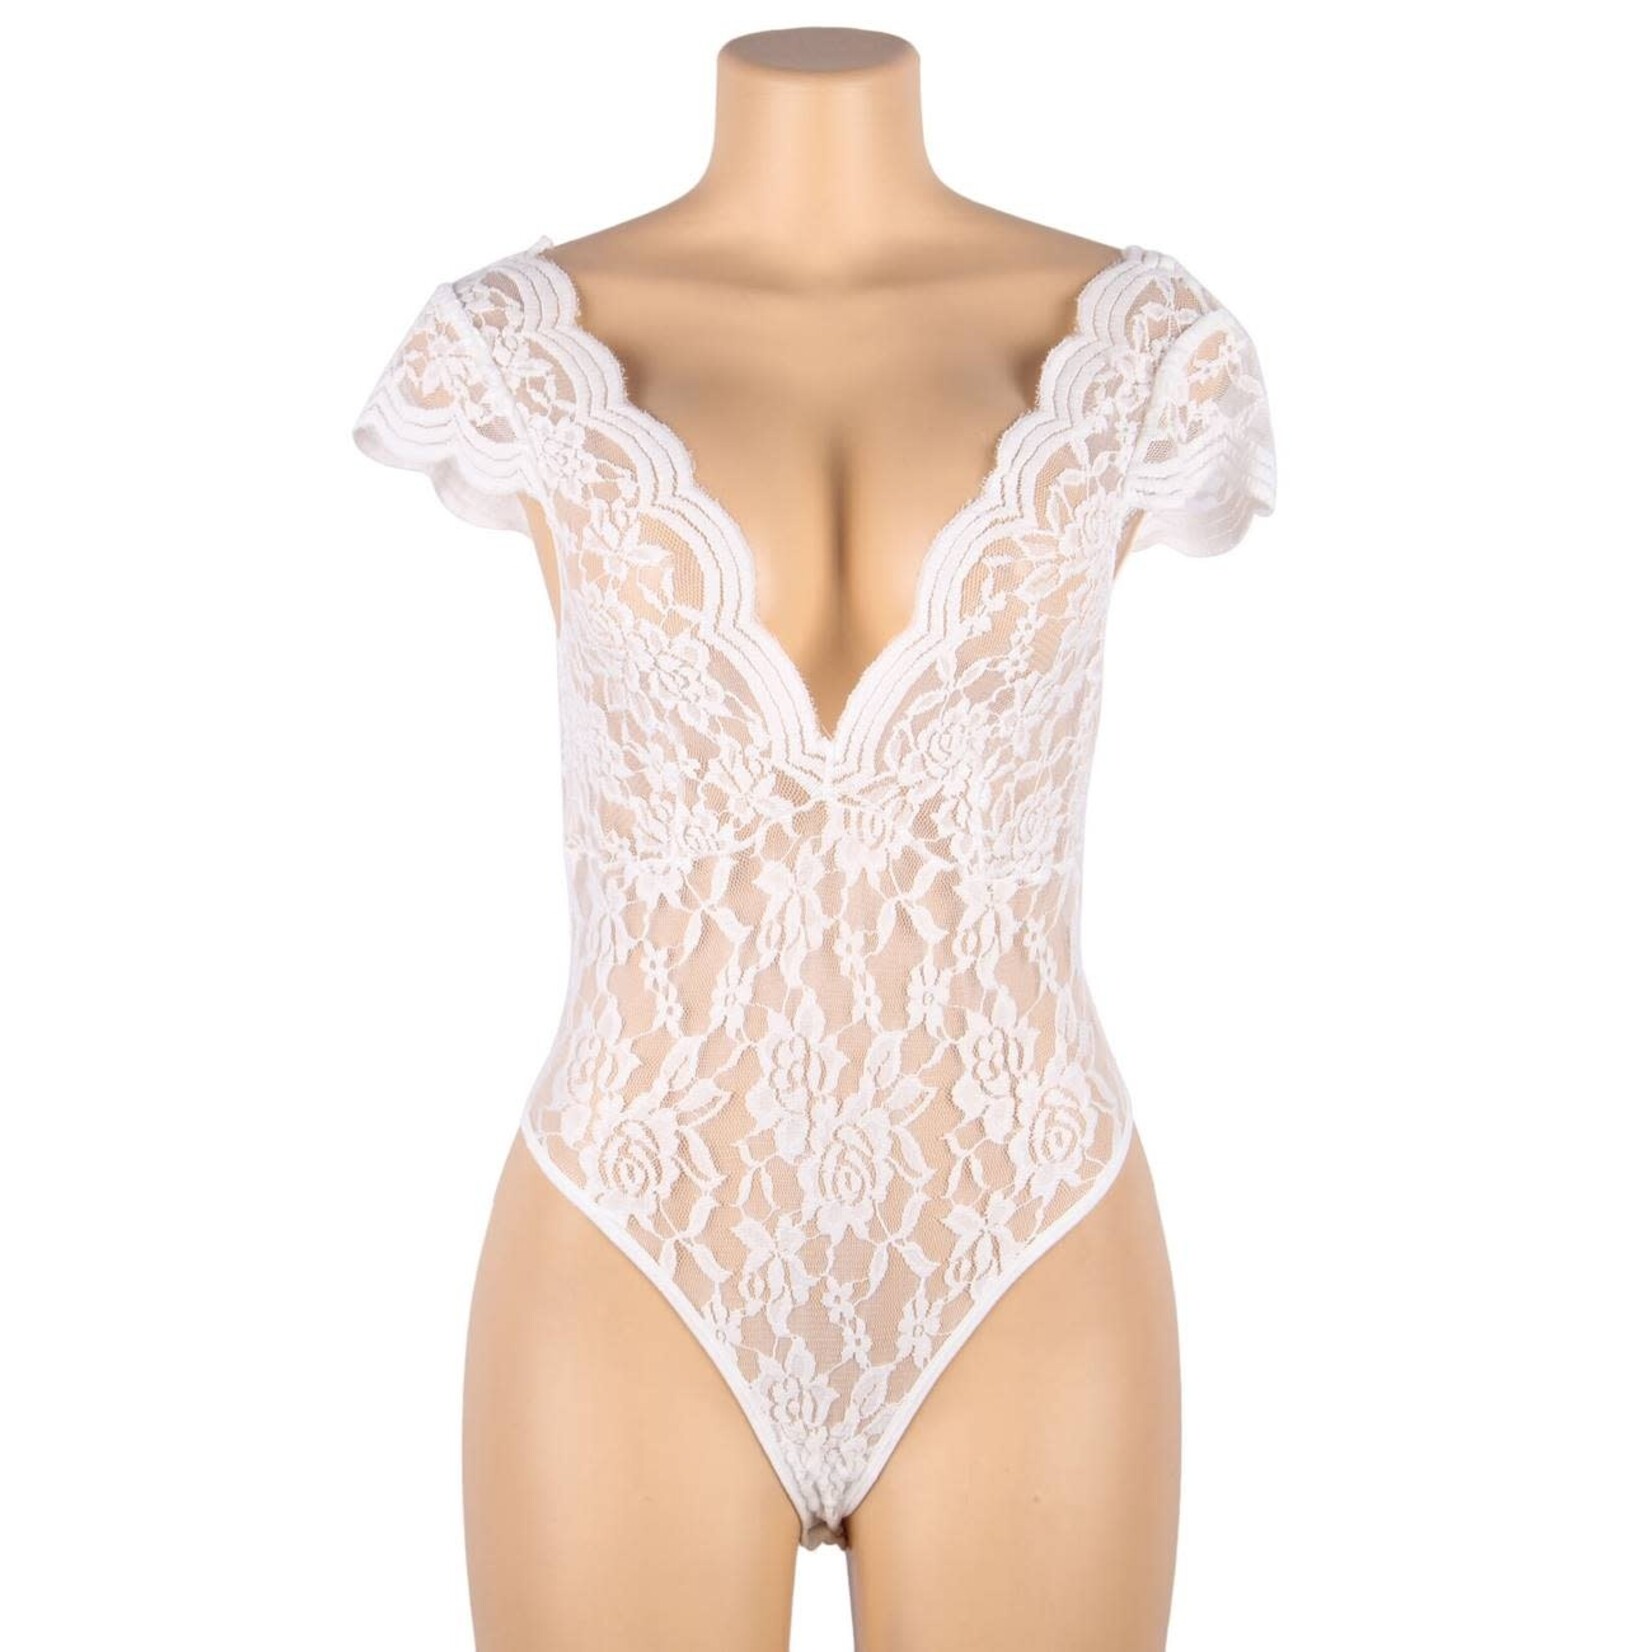 OH YEAH! -  SEXY WHITE DEEP V BACKLESS FULL LACE TEDDY XL-2XL